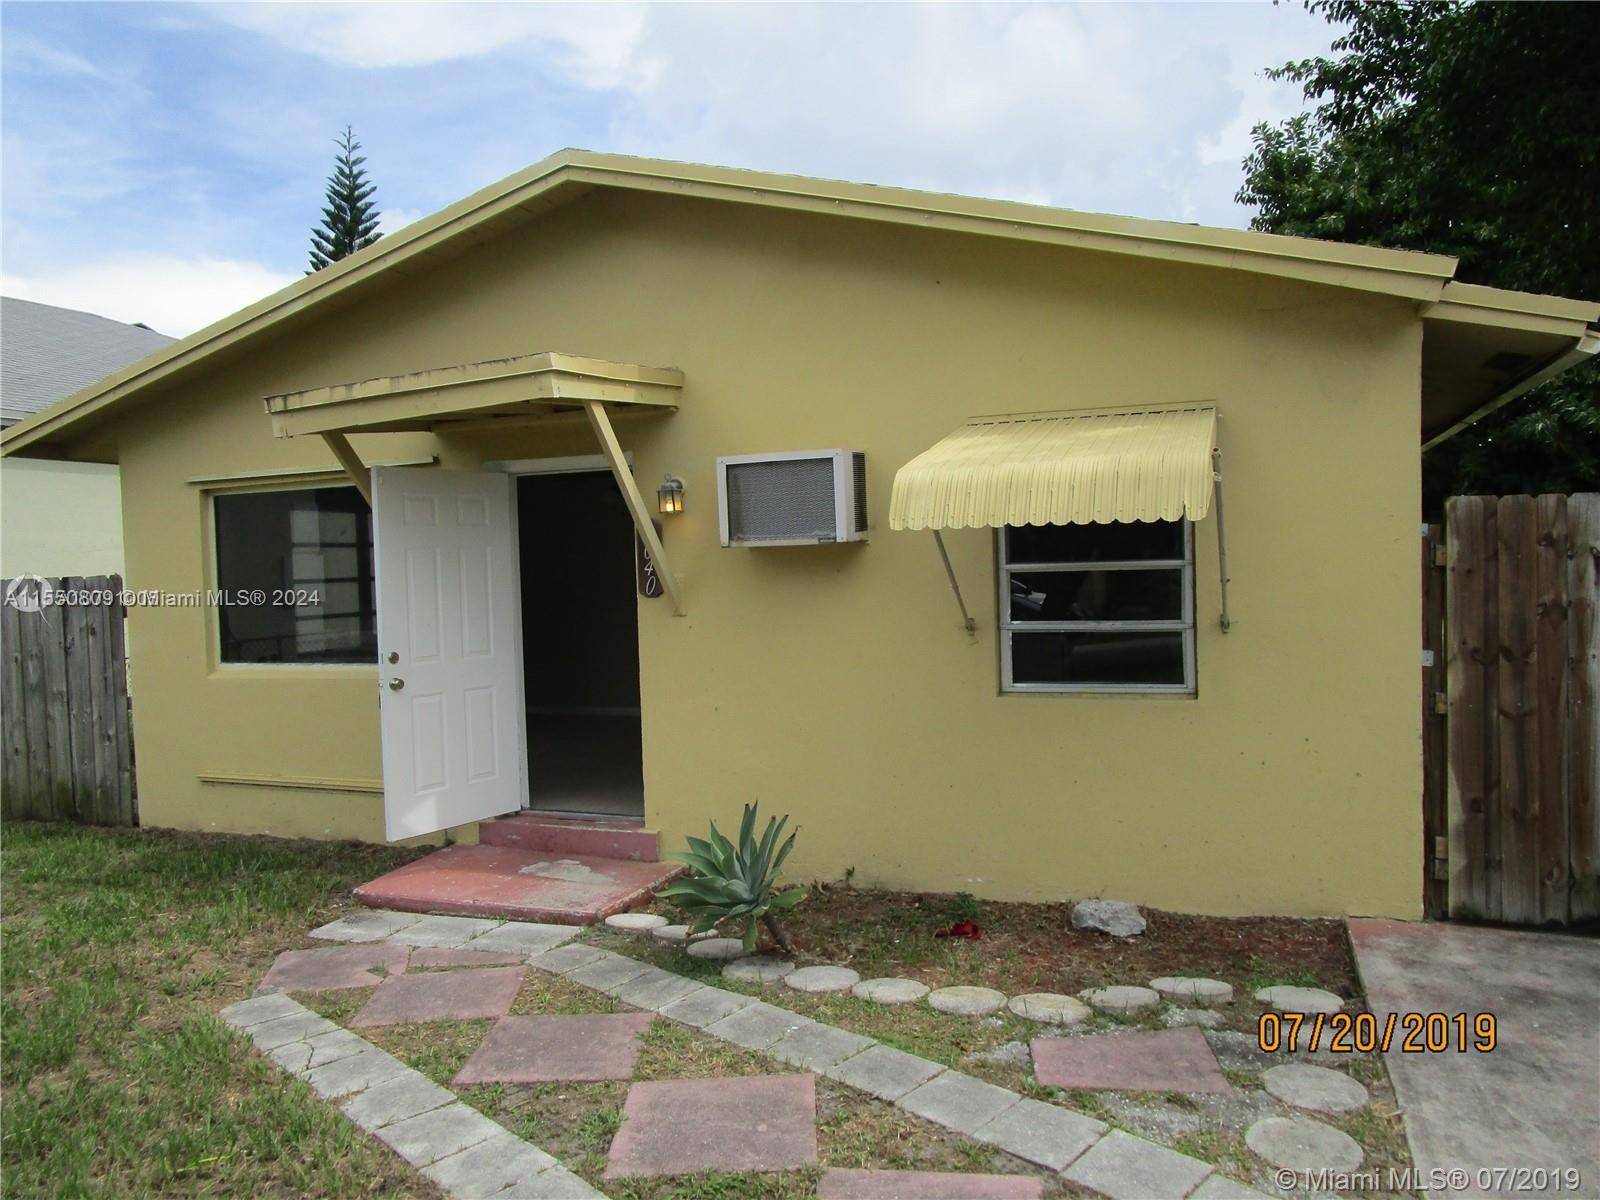 CHEAPEST AFFORDABLE HOME IN INCORPORATED BROWARD COUNTY FORT LAUDERDALE AREA.